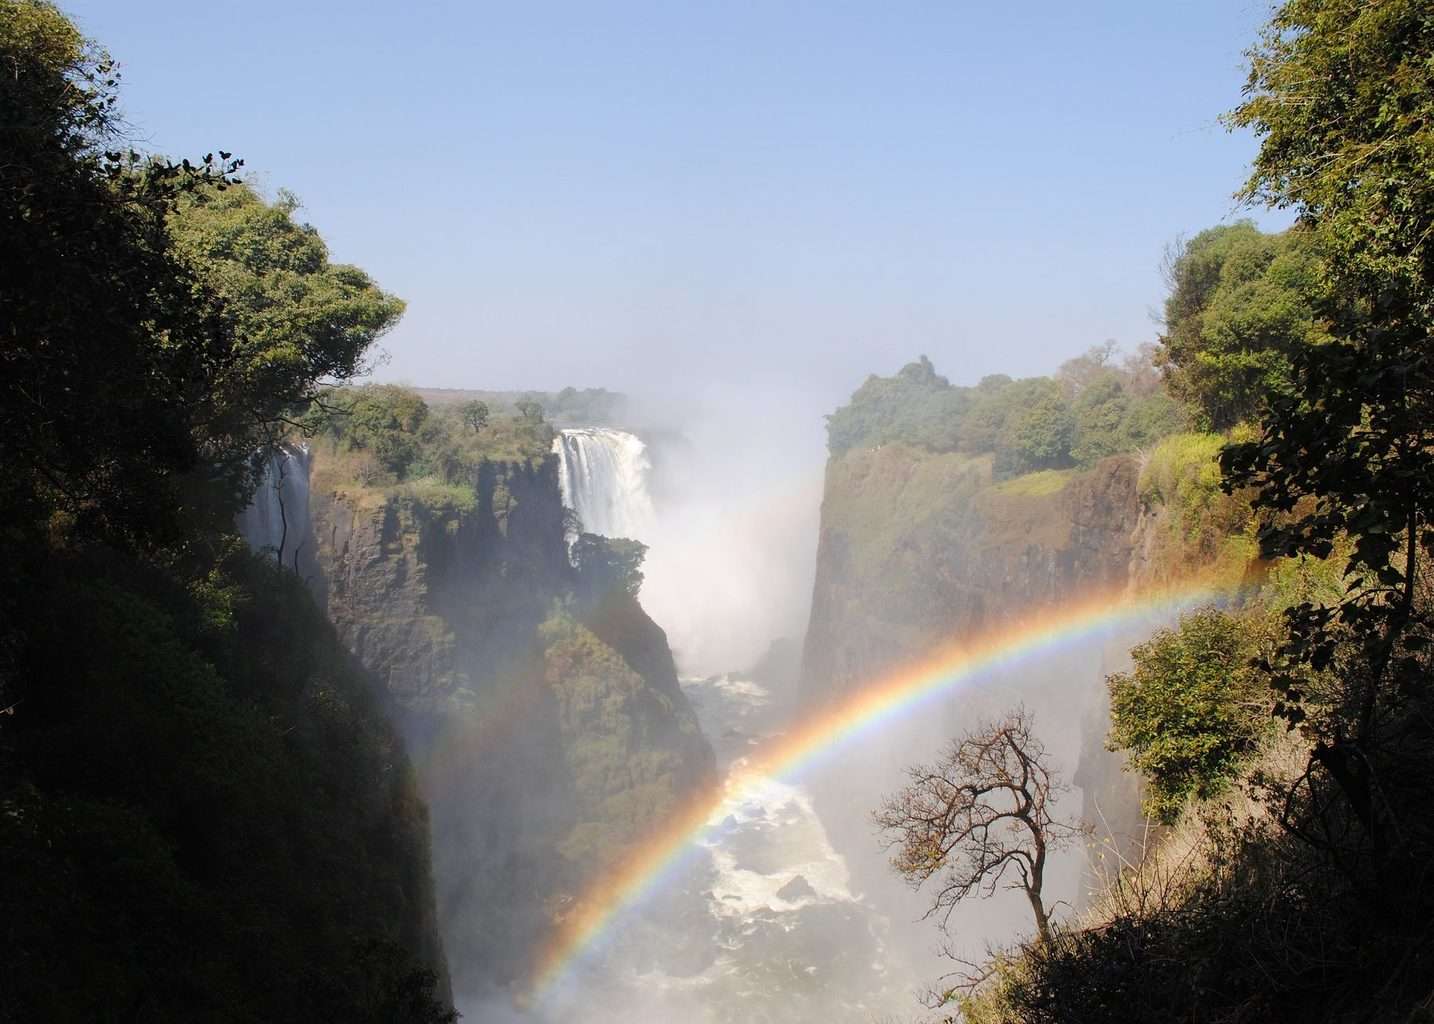 View of Victoria Falls Zambezi with rainbow in spray, part of the Kruger and Victoria Falls tour